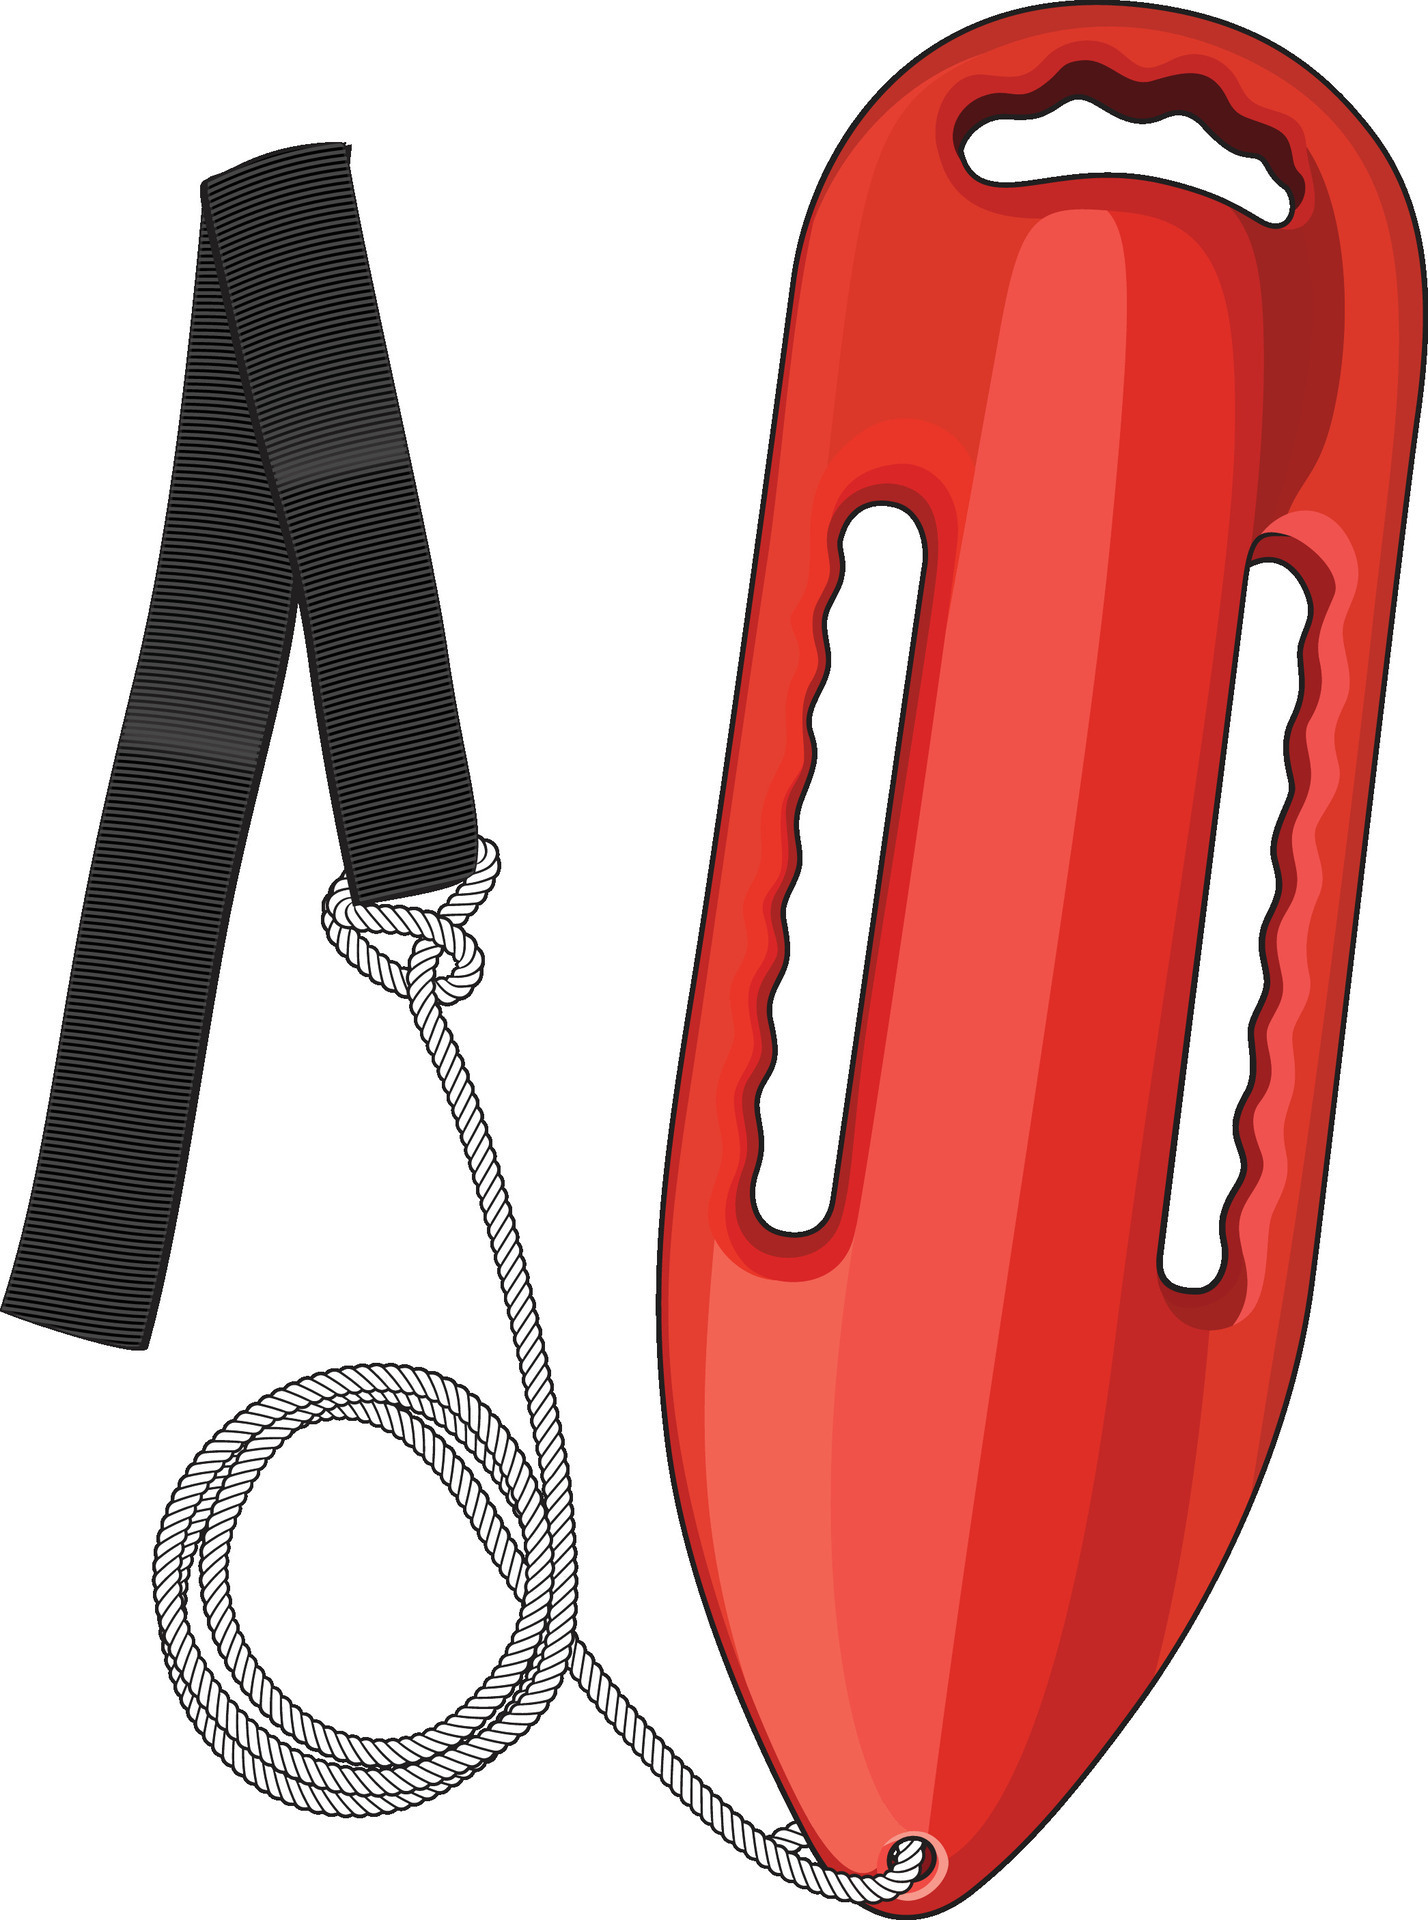 https://static.vecteezy.com/system/resources/previews/027/123/199/original/lifeguard-buoy-professional-emergency-rescue-can-open-water-swim-float-lifeguard-rescue-can-image-vector.jpg